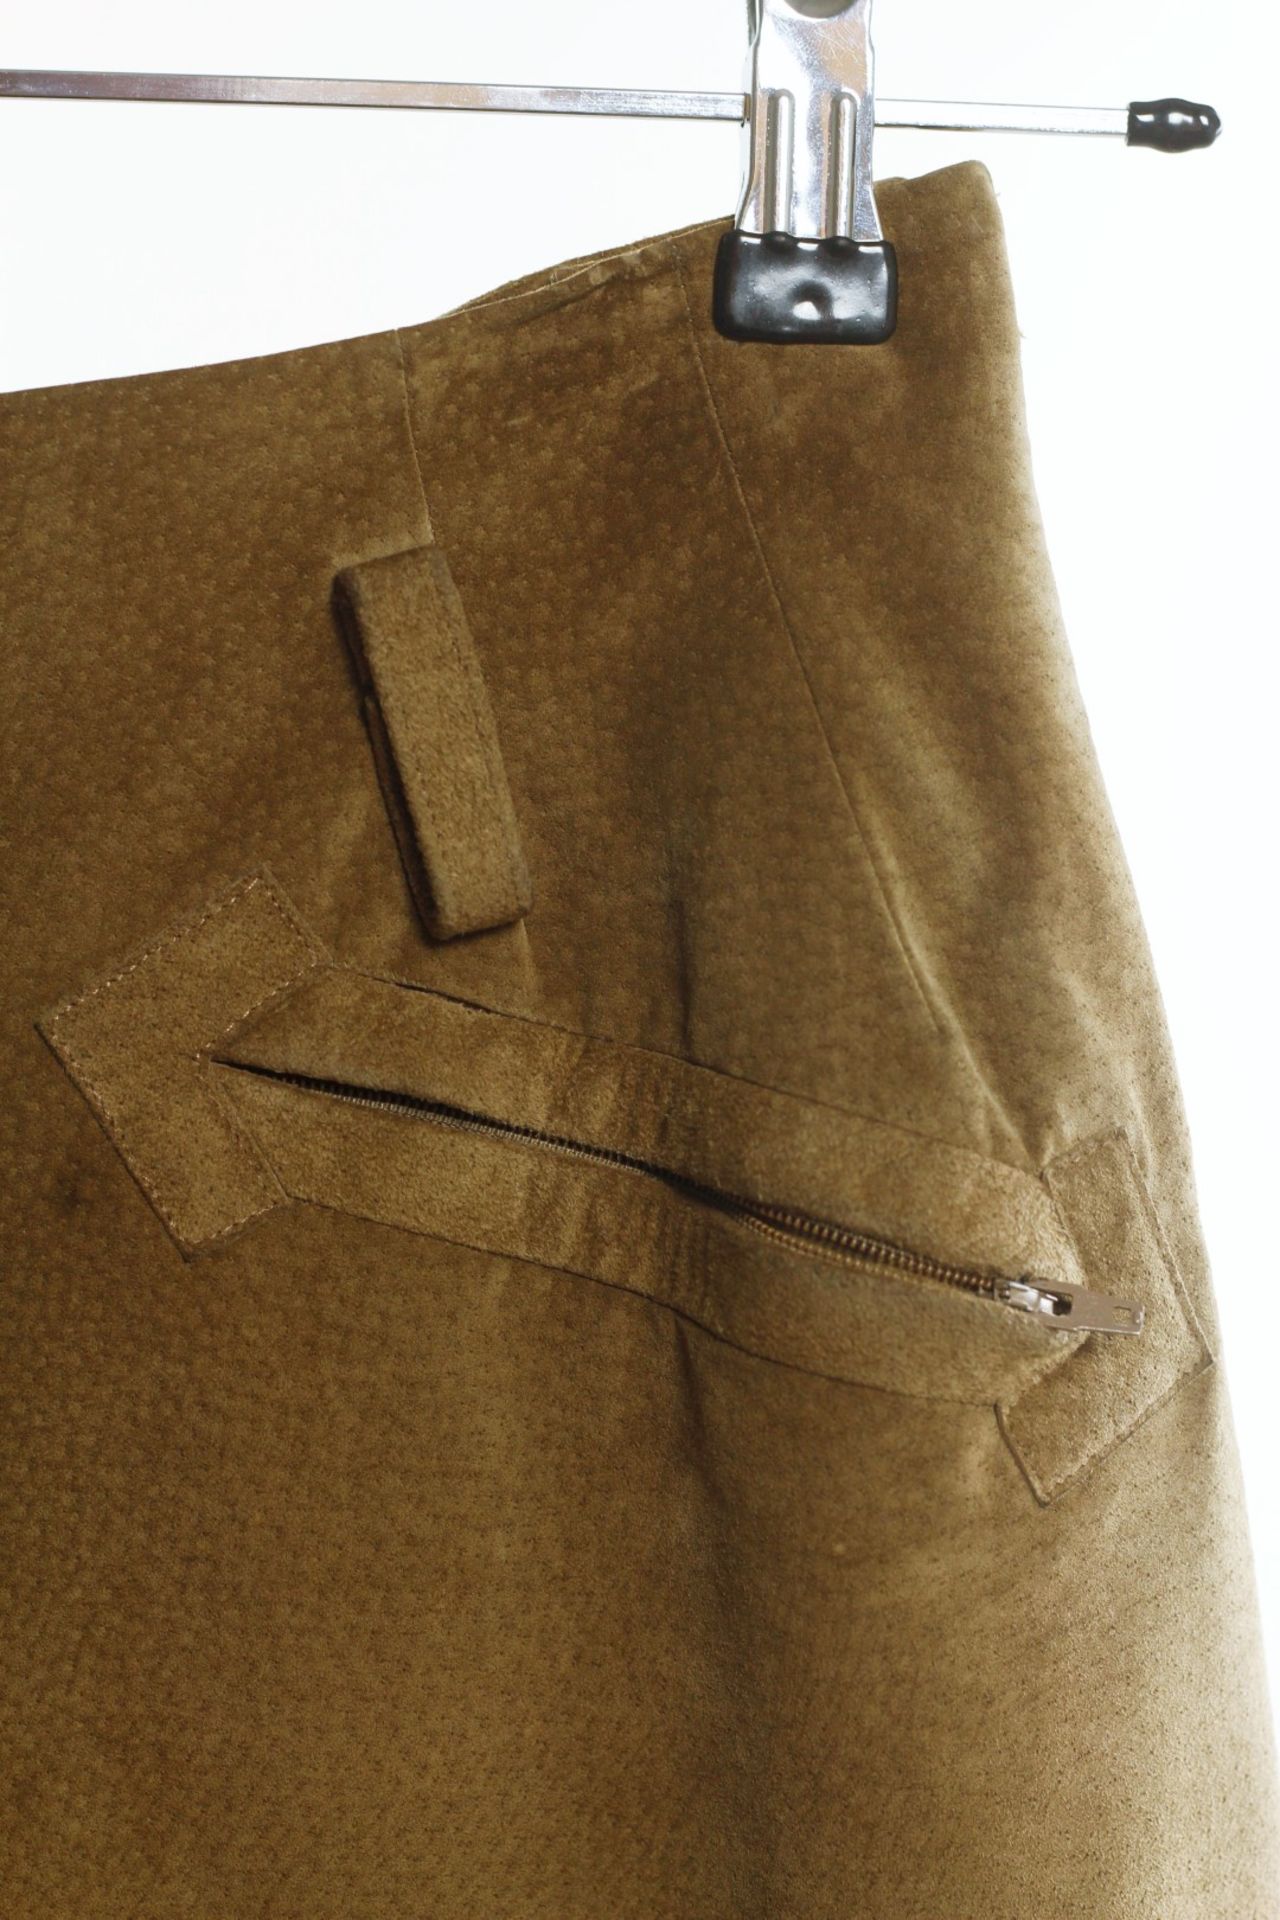 1 x Boutique Le Duc Fawn Brown Trousers - Size: 12 - Material: Natural Suede - From a High End - Image 9 of 13